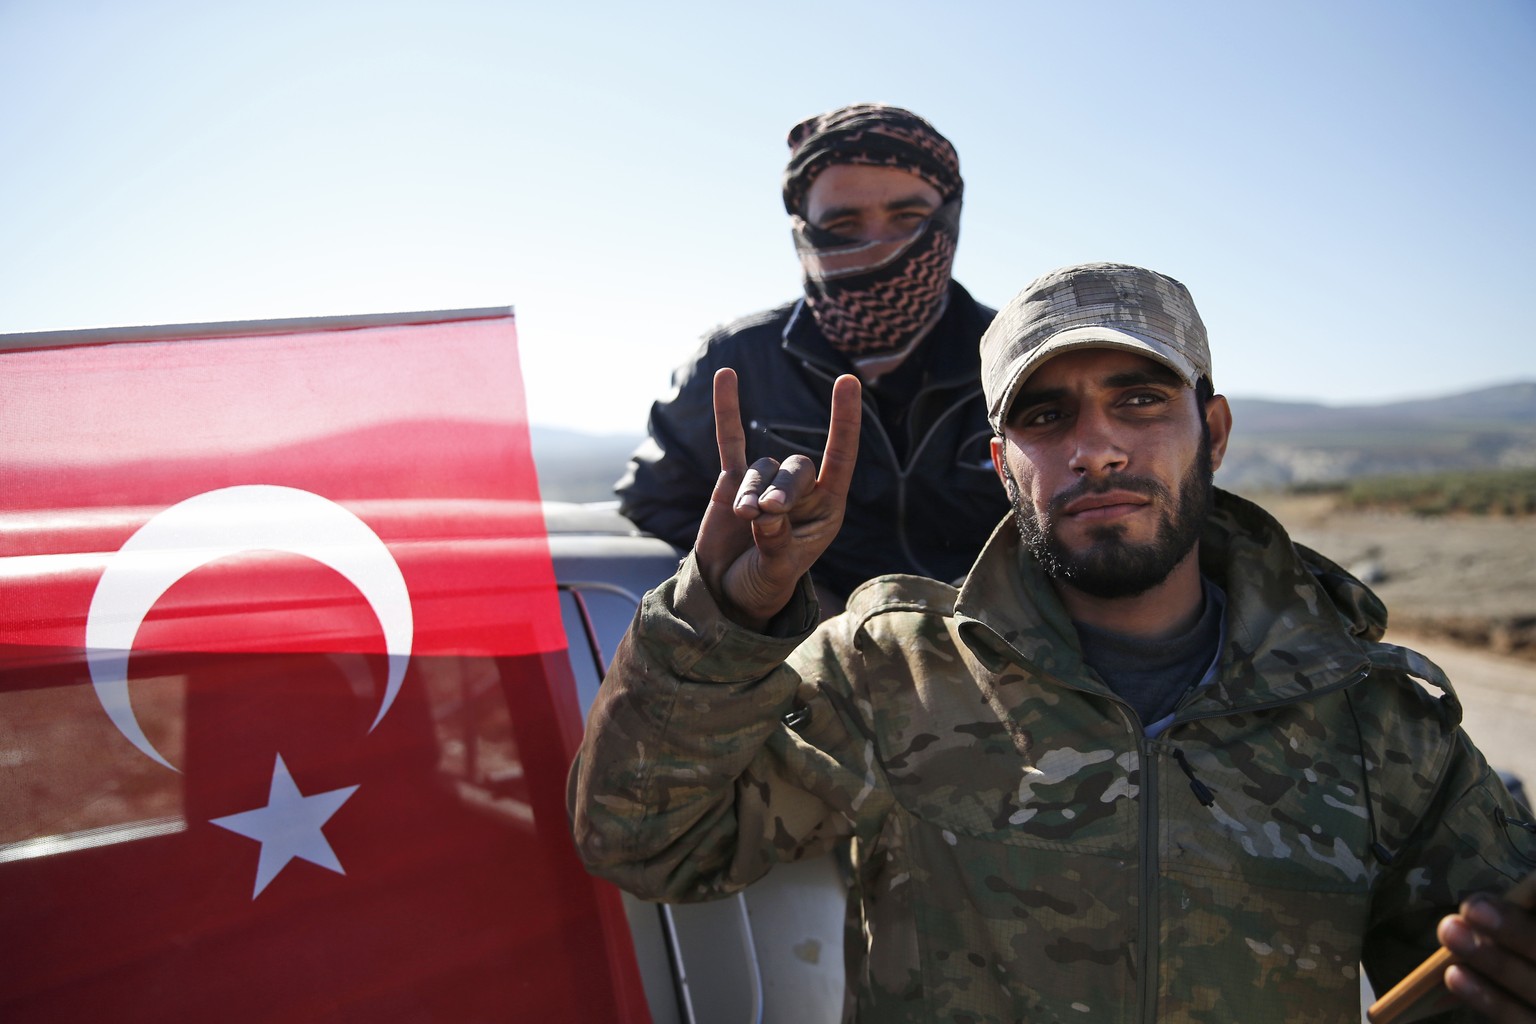 Turkey-backed Syrian opposition fighters of the Free Syrian Army wait to be driven towards the border with Syria, in the outskirts of the border town of Kilis, Turkey, Tuesday, Jan. 30, 2018. Turkey l ...